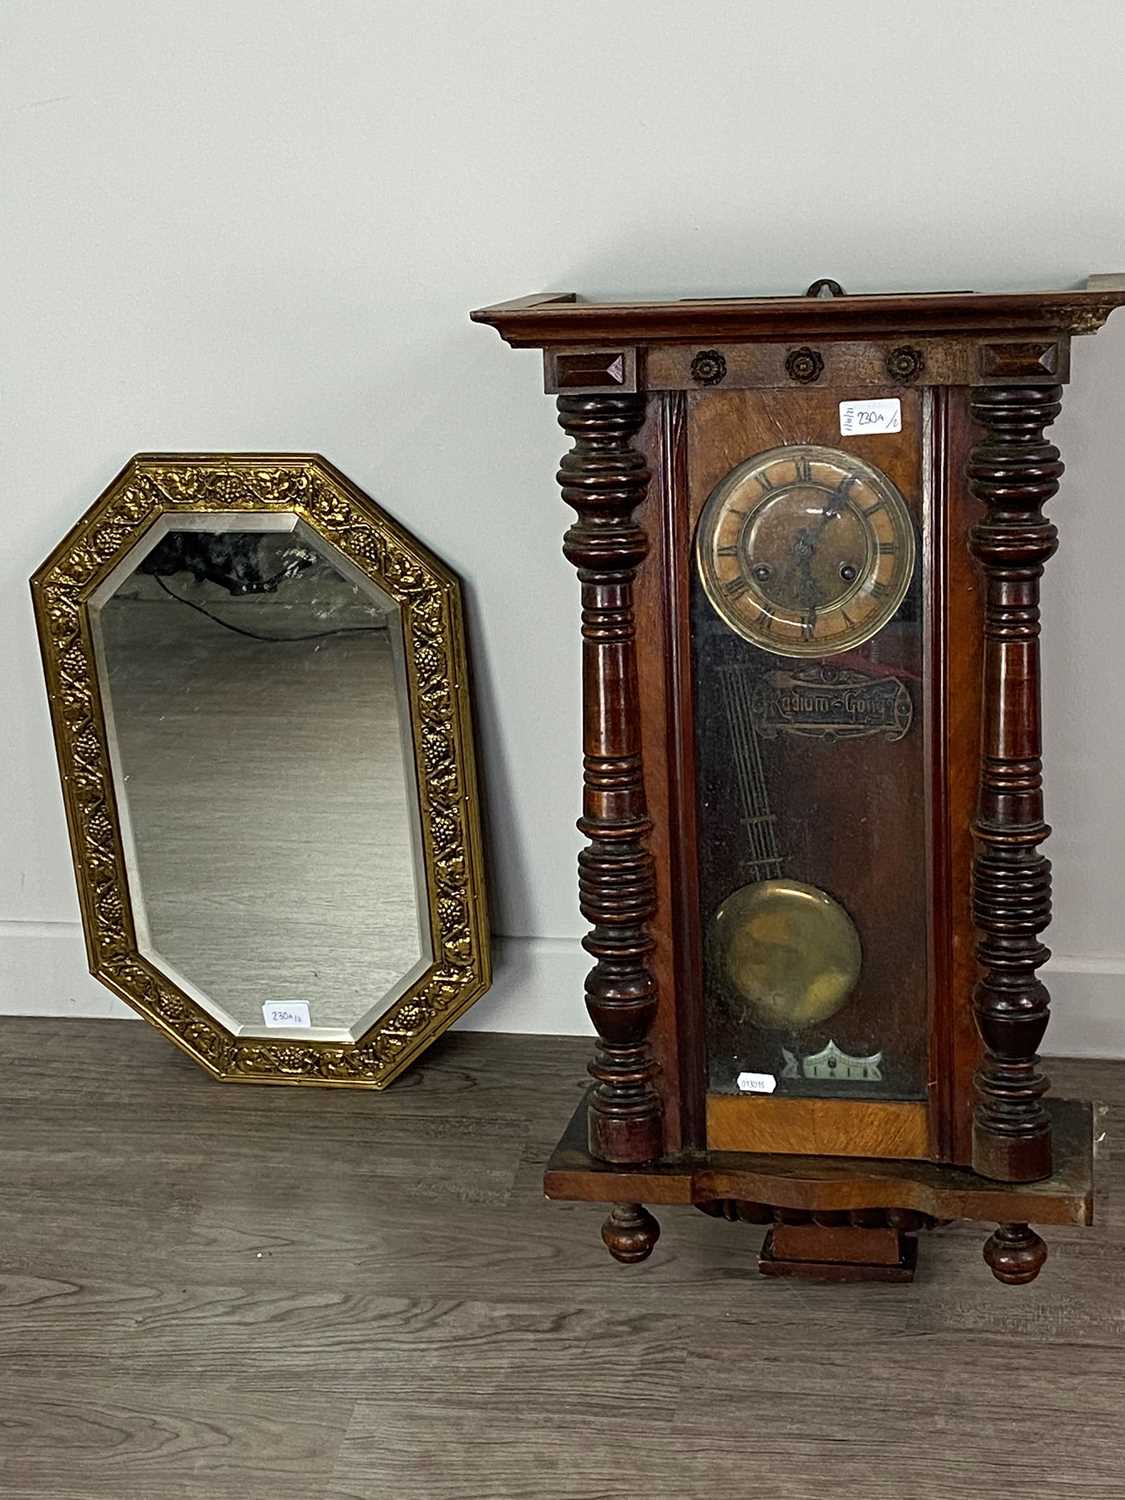 Lot 230 - AN OAK WALL CLOCK AND A BRASS EMBOSSED WALL MIRROR